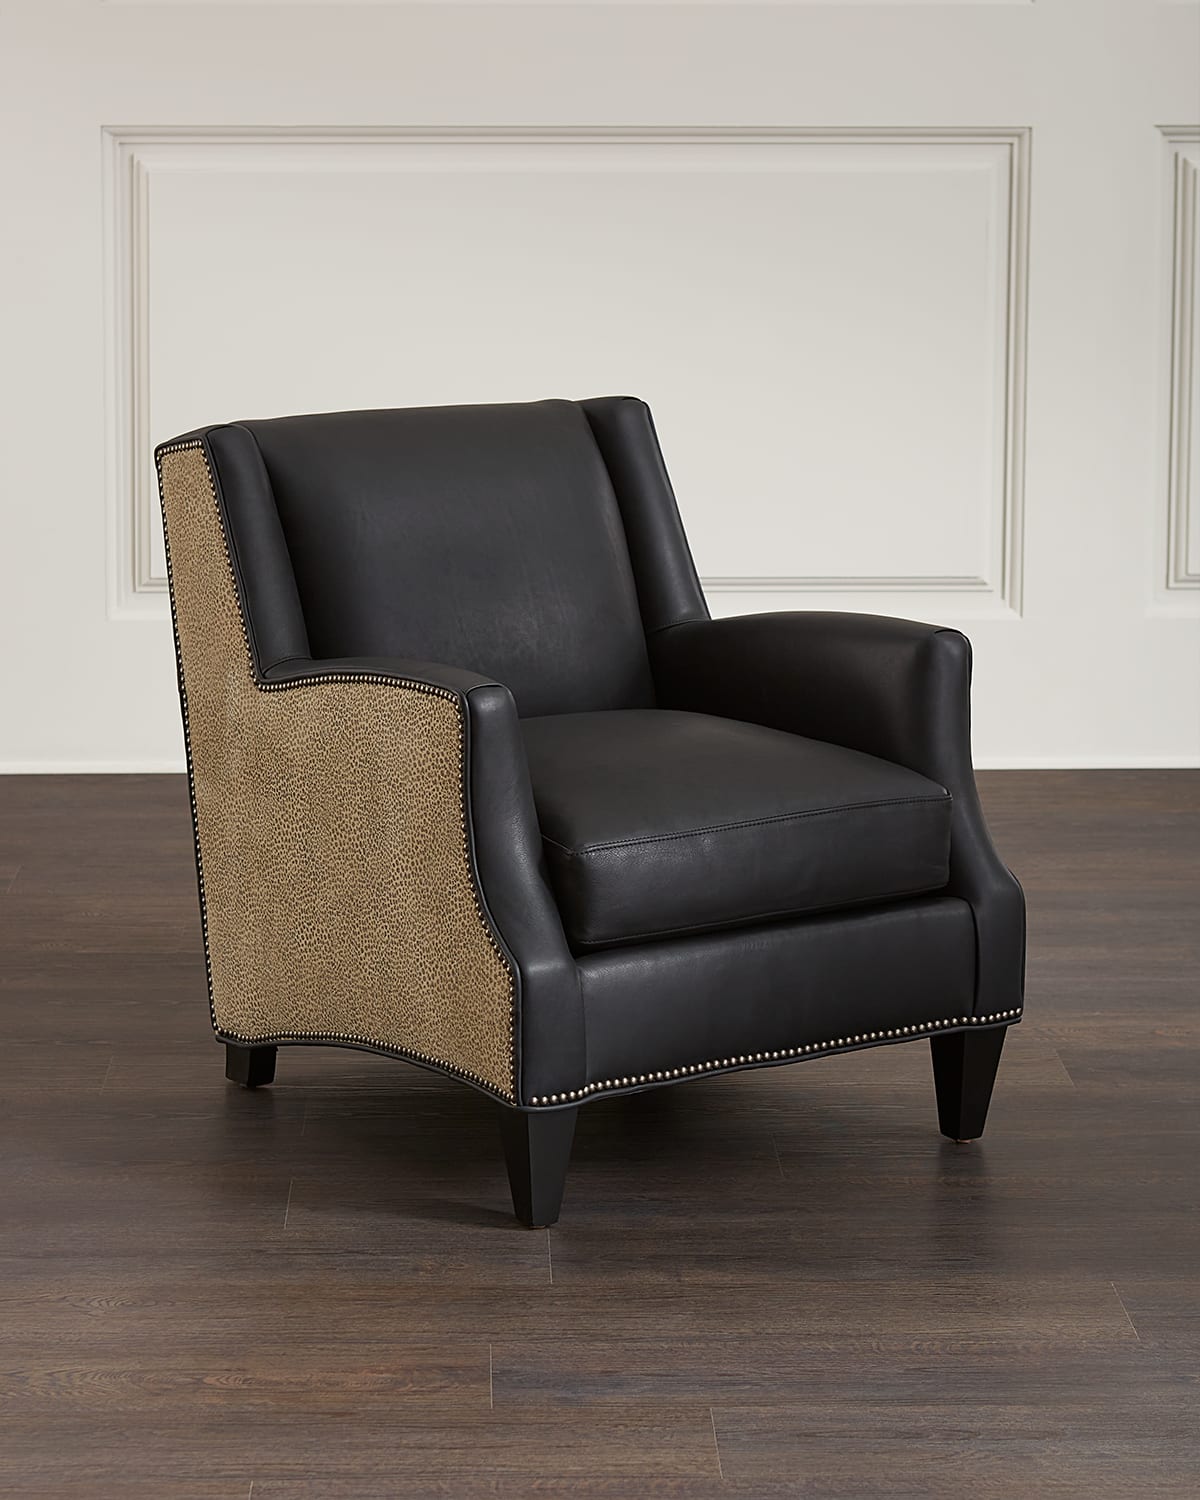 Kane Leather Chair